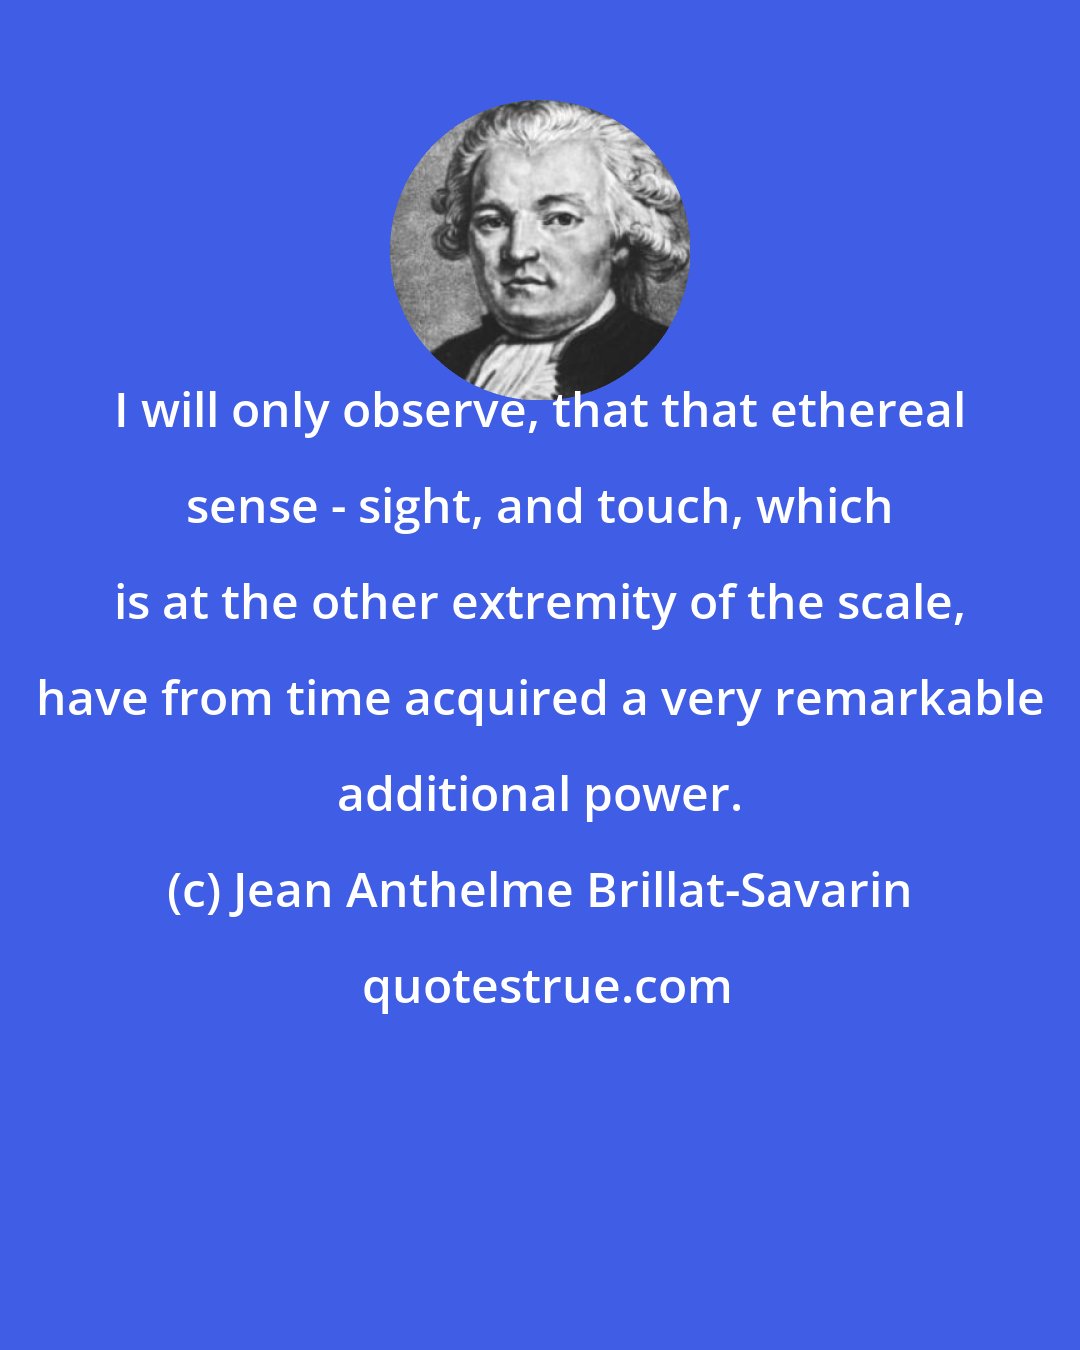 Jean Anthelme Brillat-Savarin: I will only observe, that that ethereal sense - sight, and touch, which is at the other extremity of the scale, have from time acquired a very remarkable additional power.